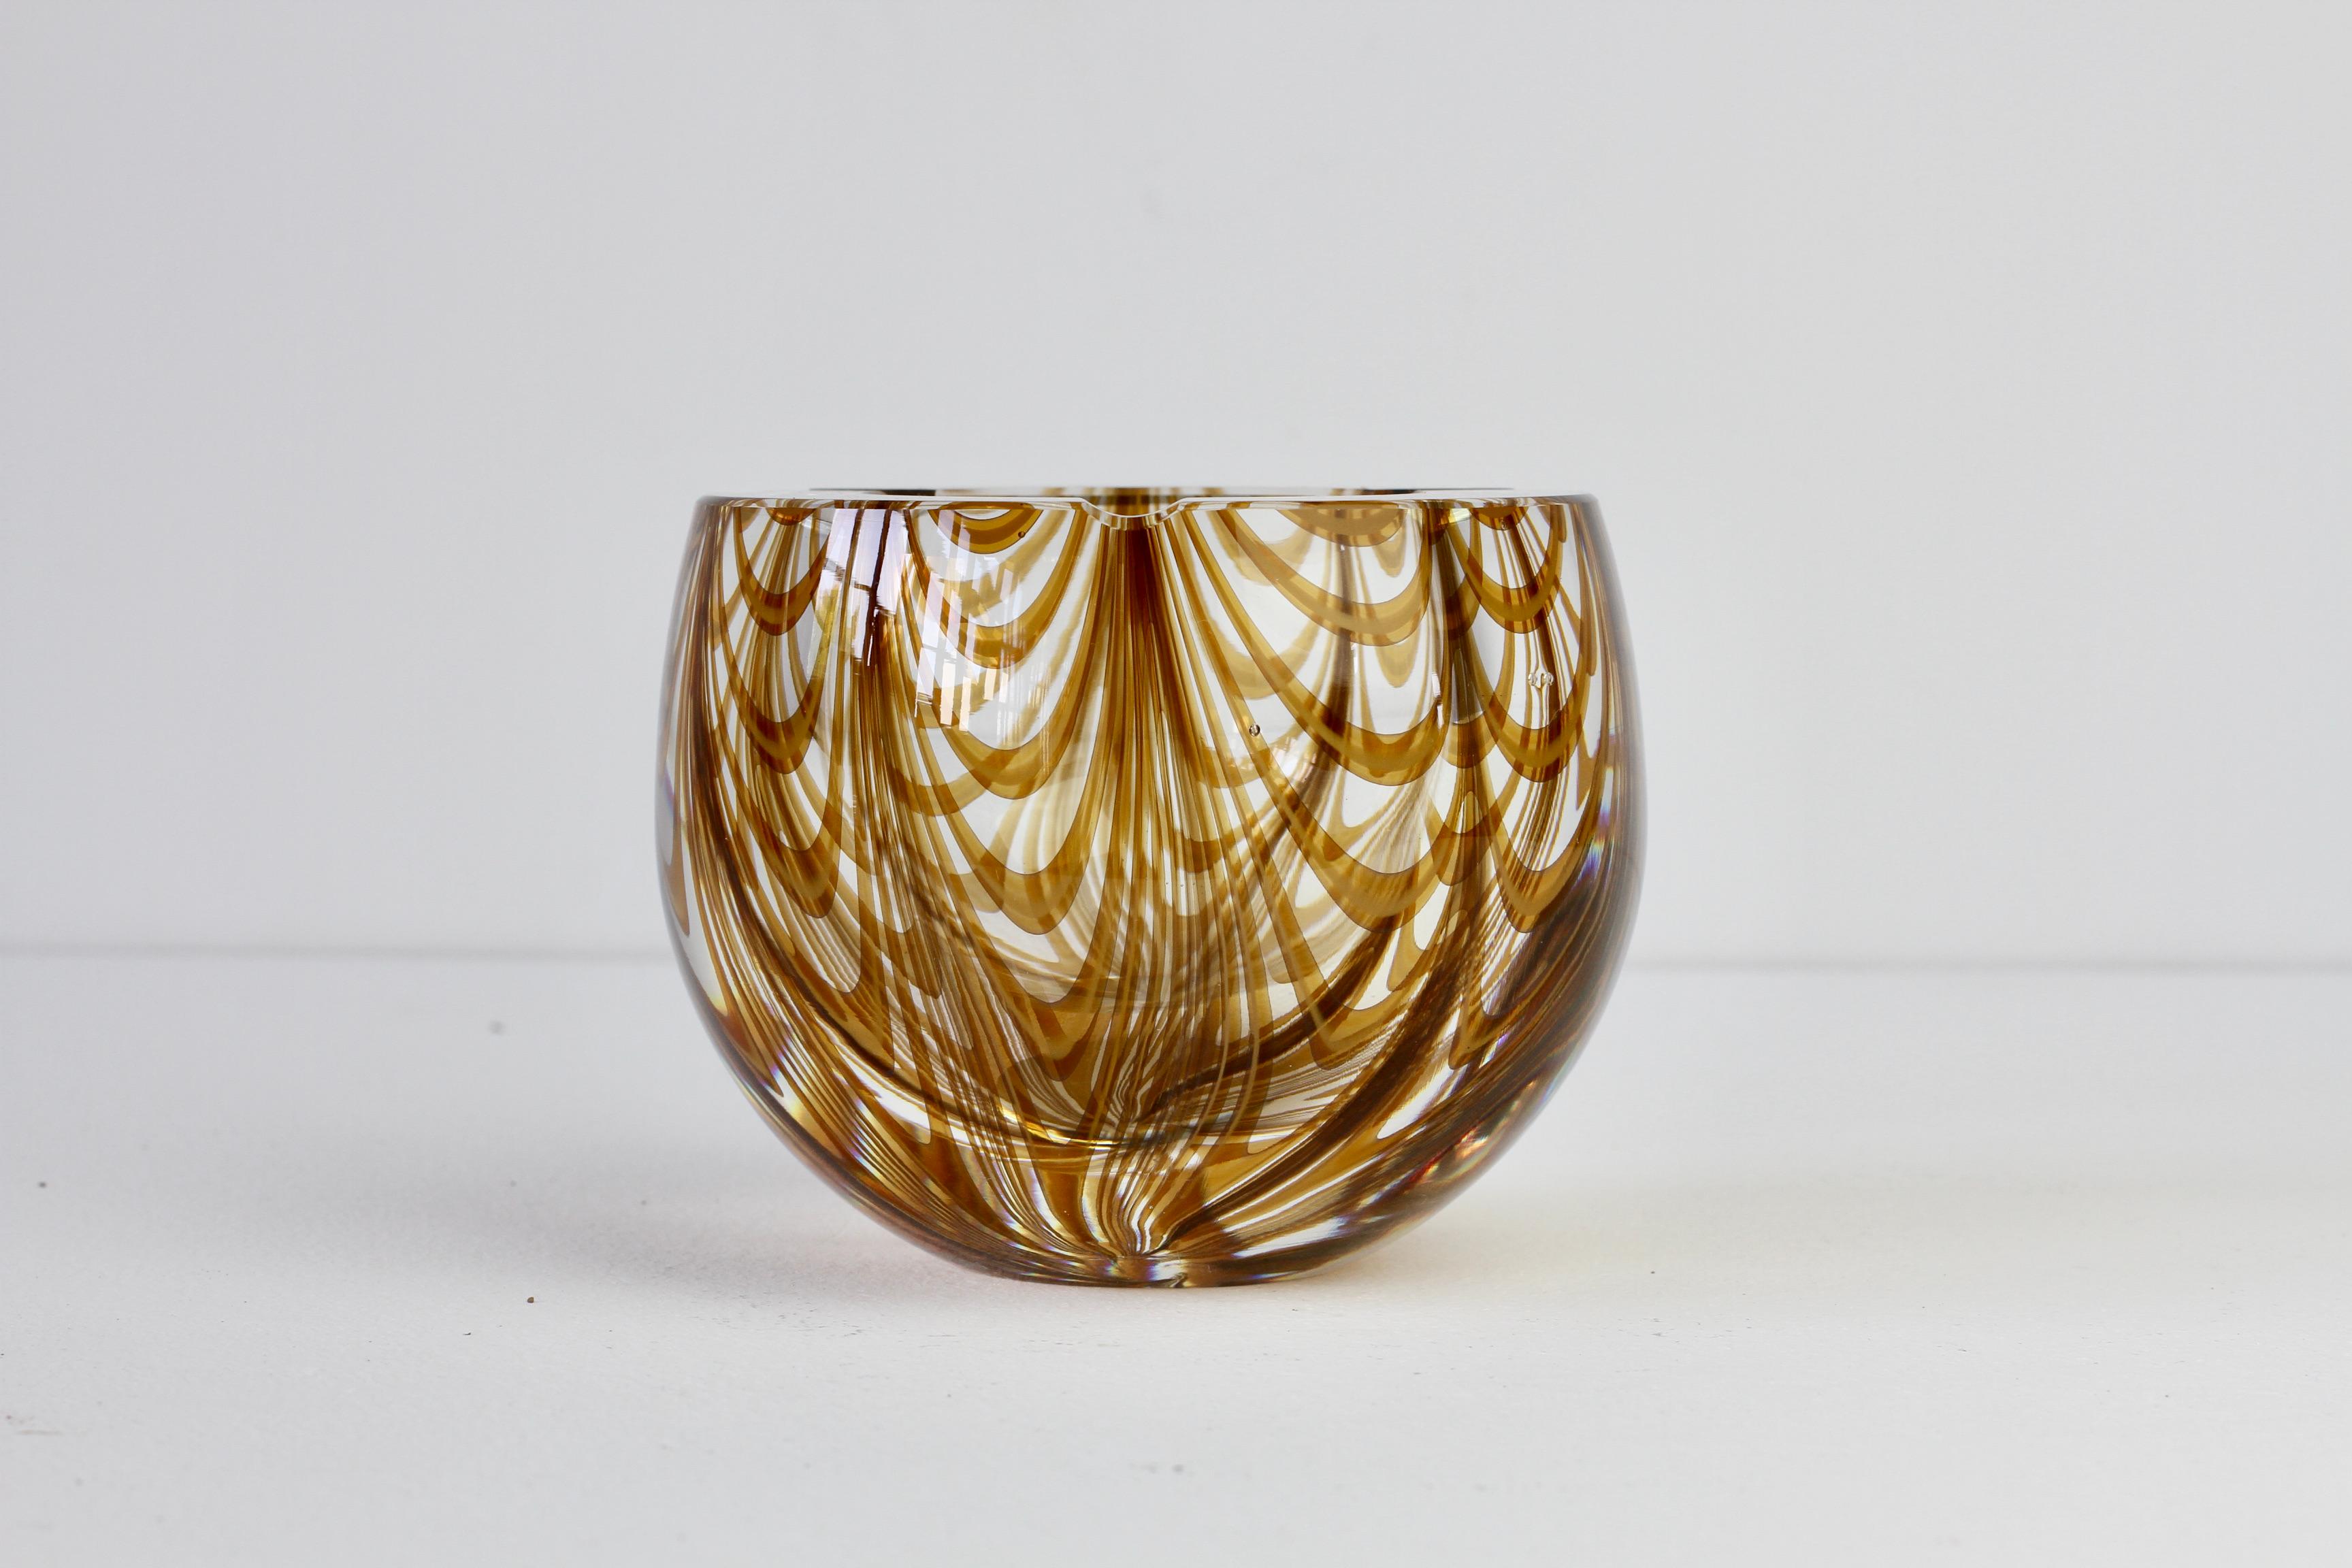 Antonio da Ros (attributed) for Cenedese large and heavy vintage Mid-Century Modern Italian Murano glass ashtray, circa 1965-1975. This large, heavy piece of glass features an asymmetric design of amber toned glass curved 'Zebrato' stripes encased